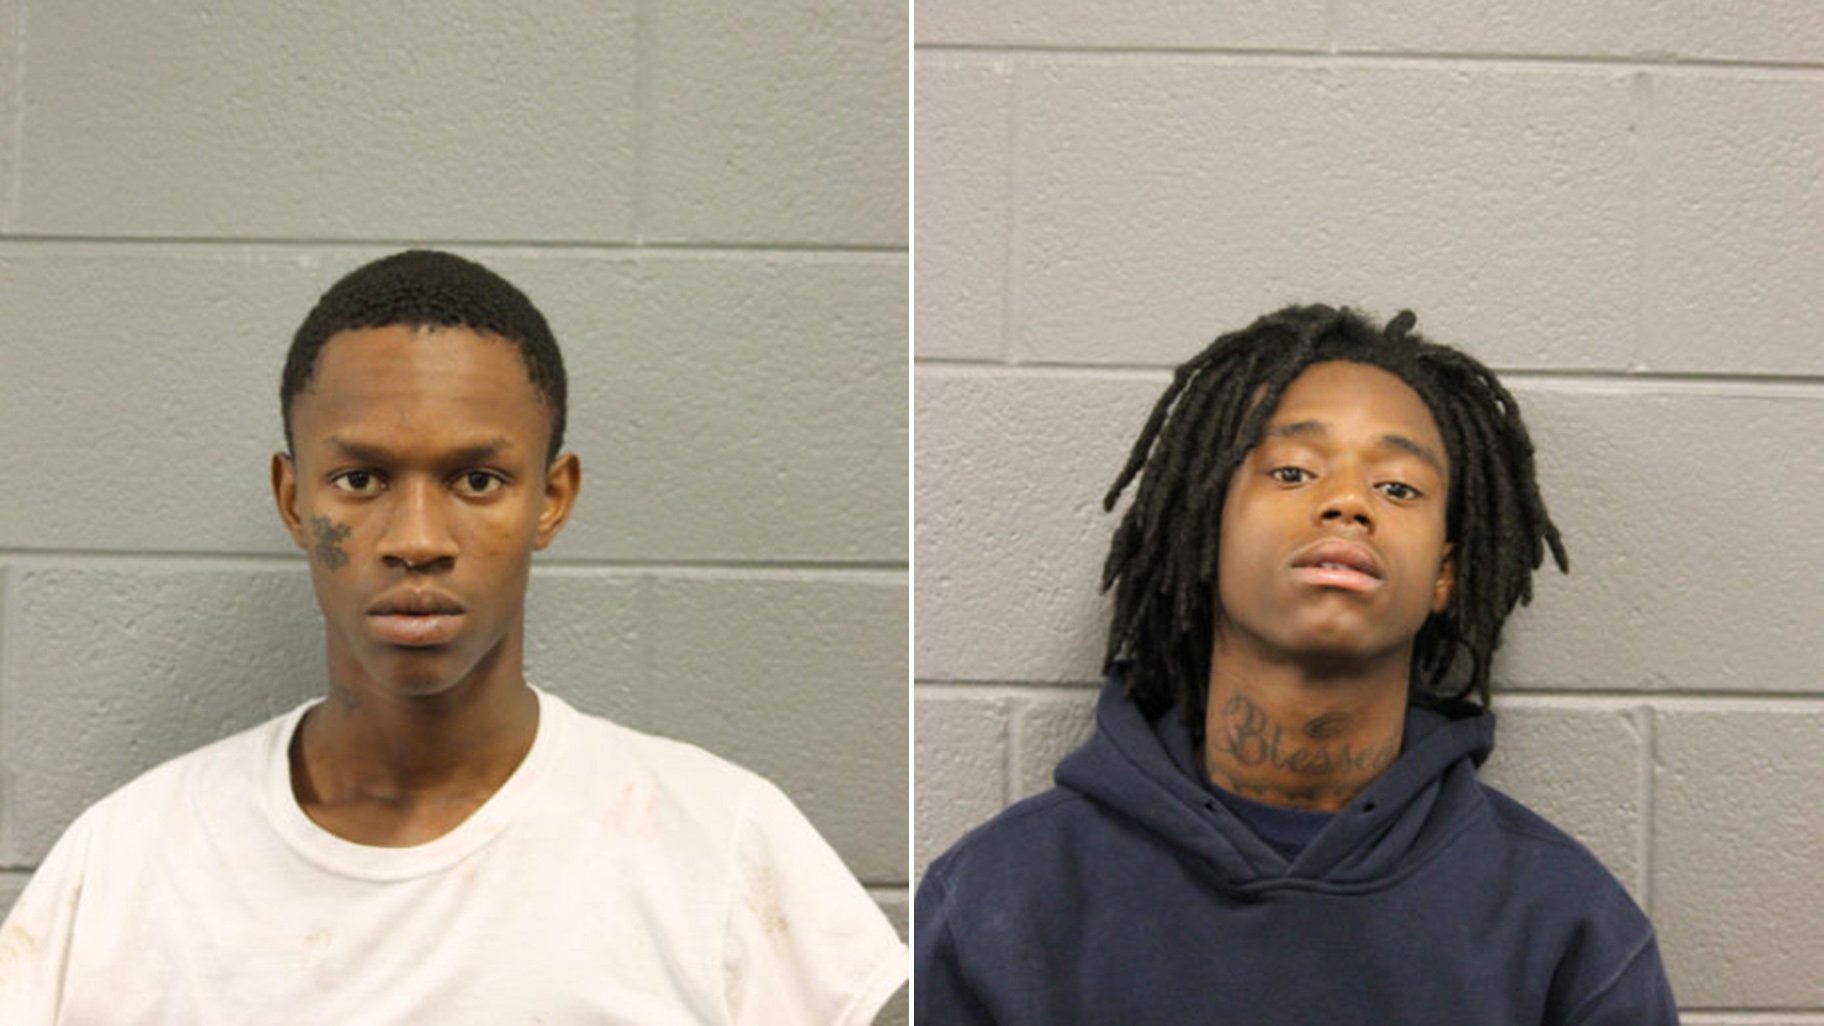 Dimari Terry, left, and Tramaine Watson were each charged with multiple felonies Wednesday. (Chicago Police Department)